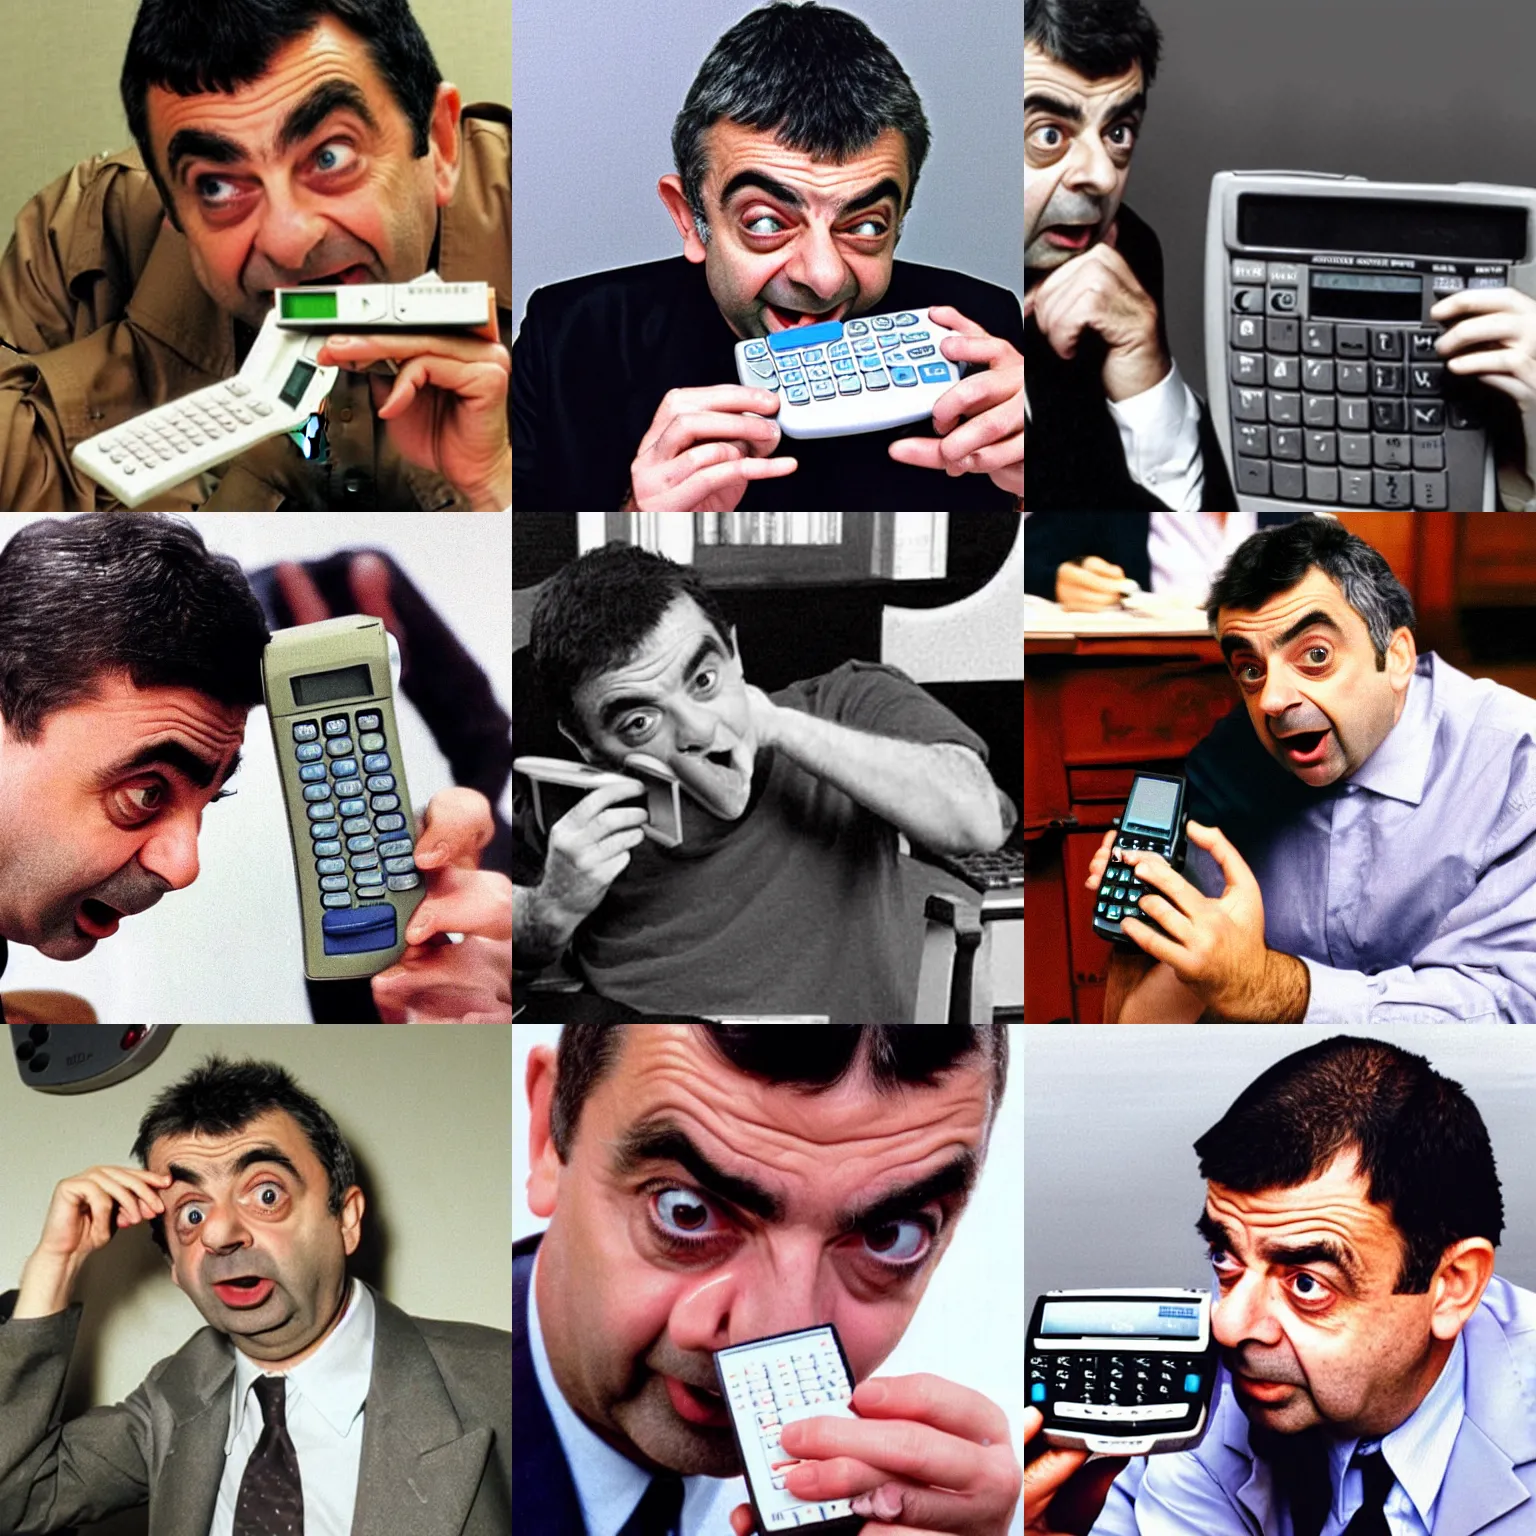 Prompt: funny photo of rowan atkinson trying to eat calculator casio calculator calculator calculator calculator, close up